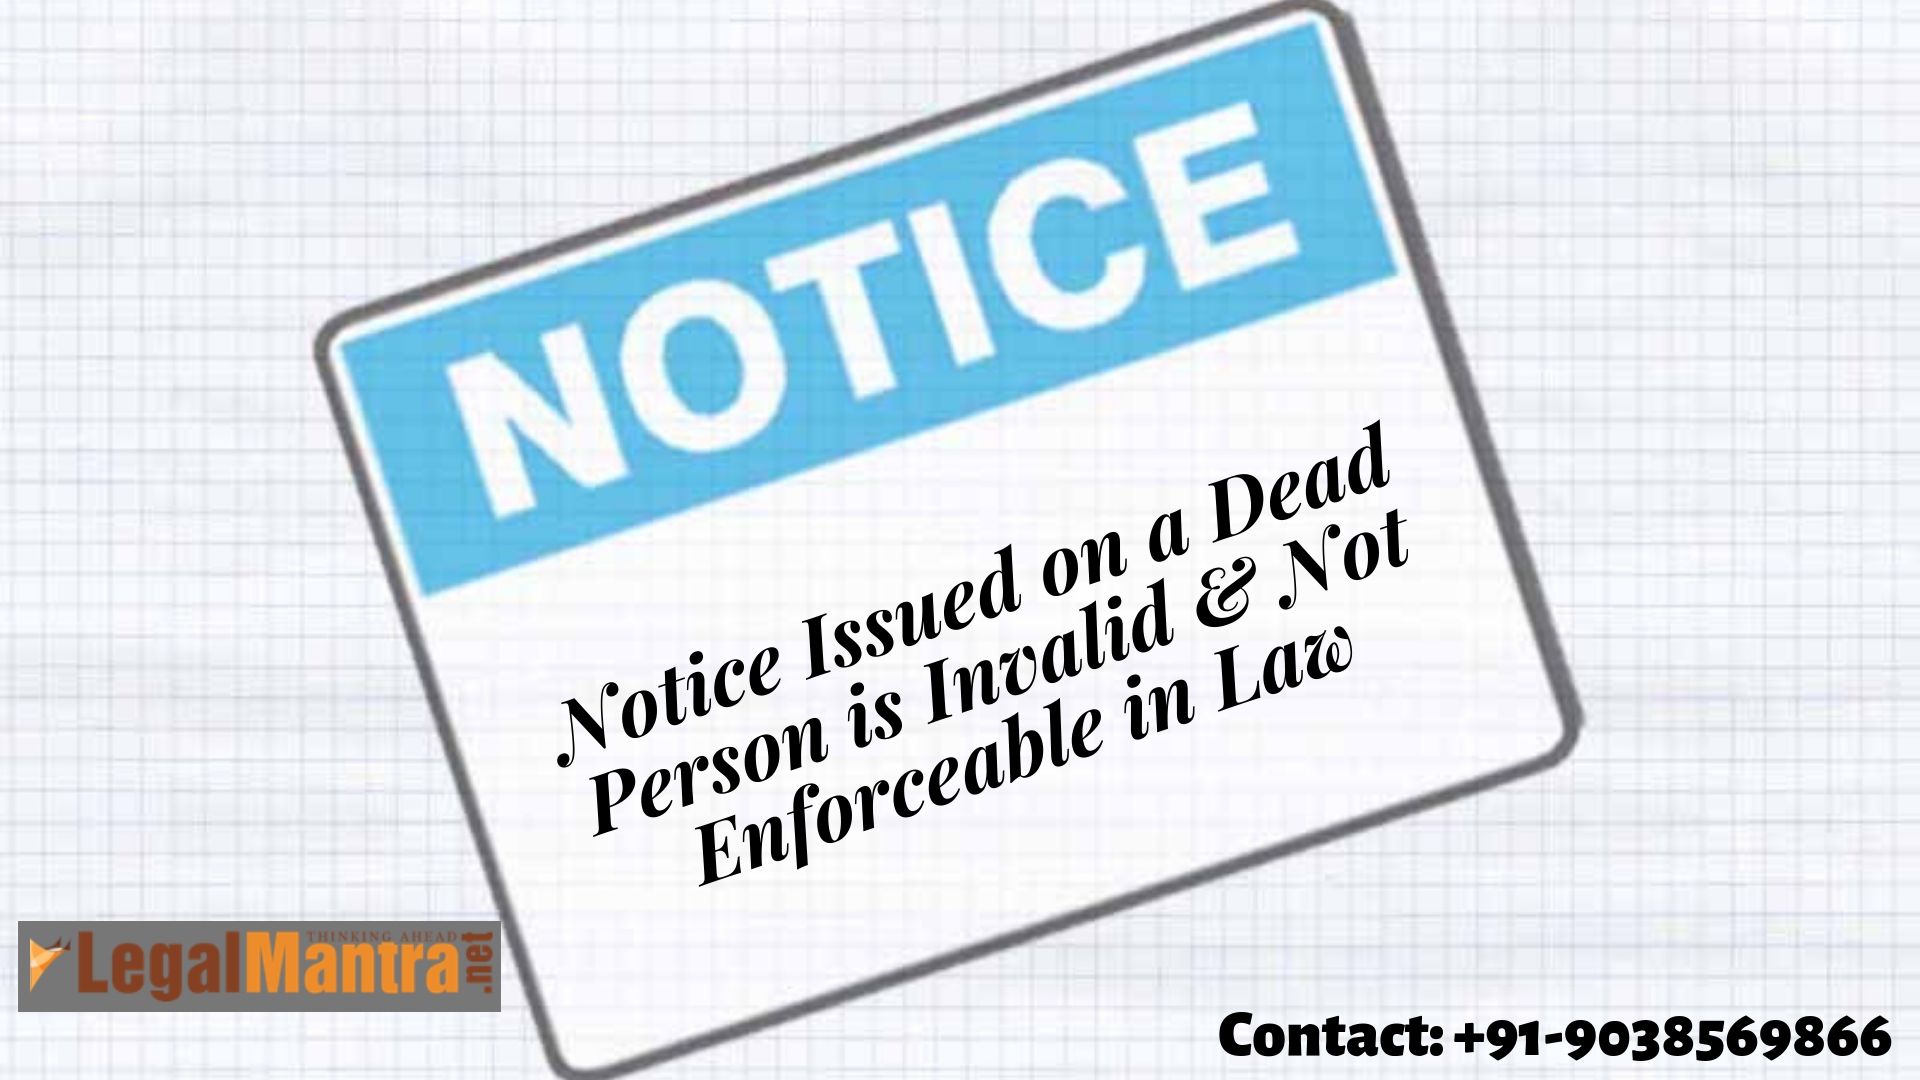 Notice Issued on a Dead Person is Invalid & Not Enforceable in Law